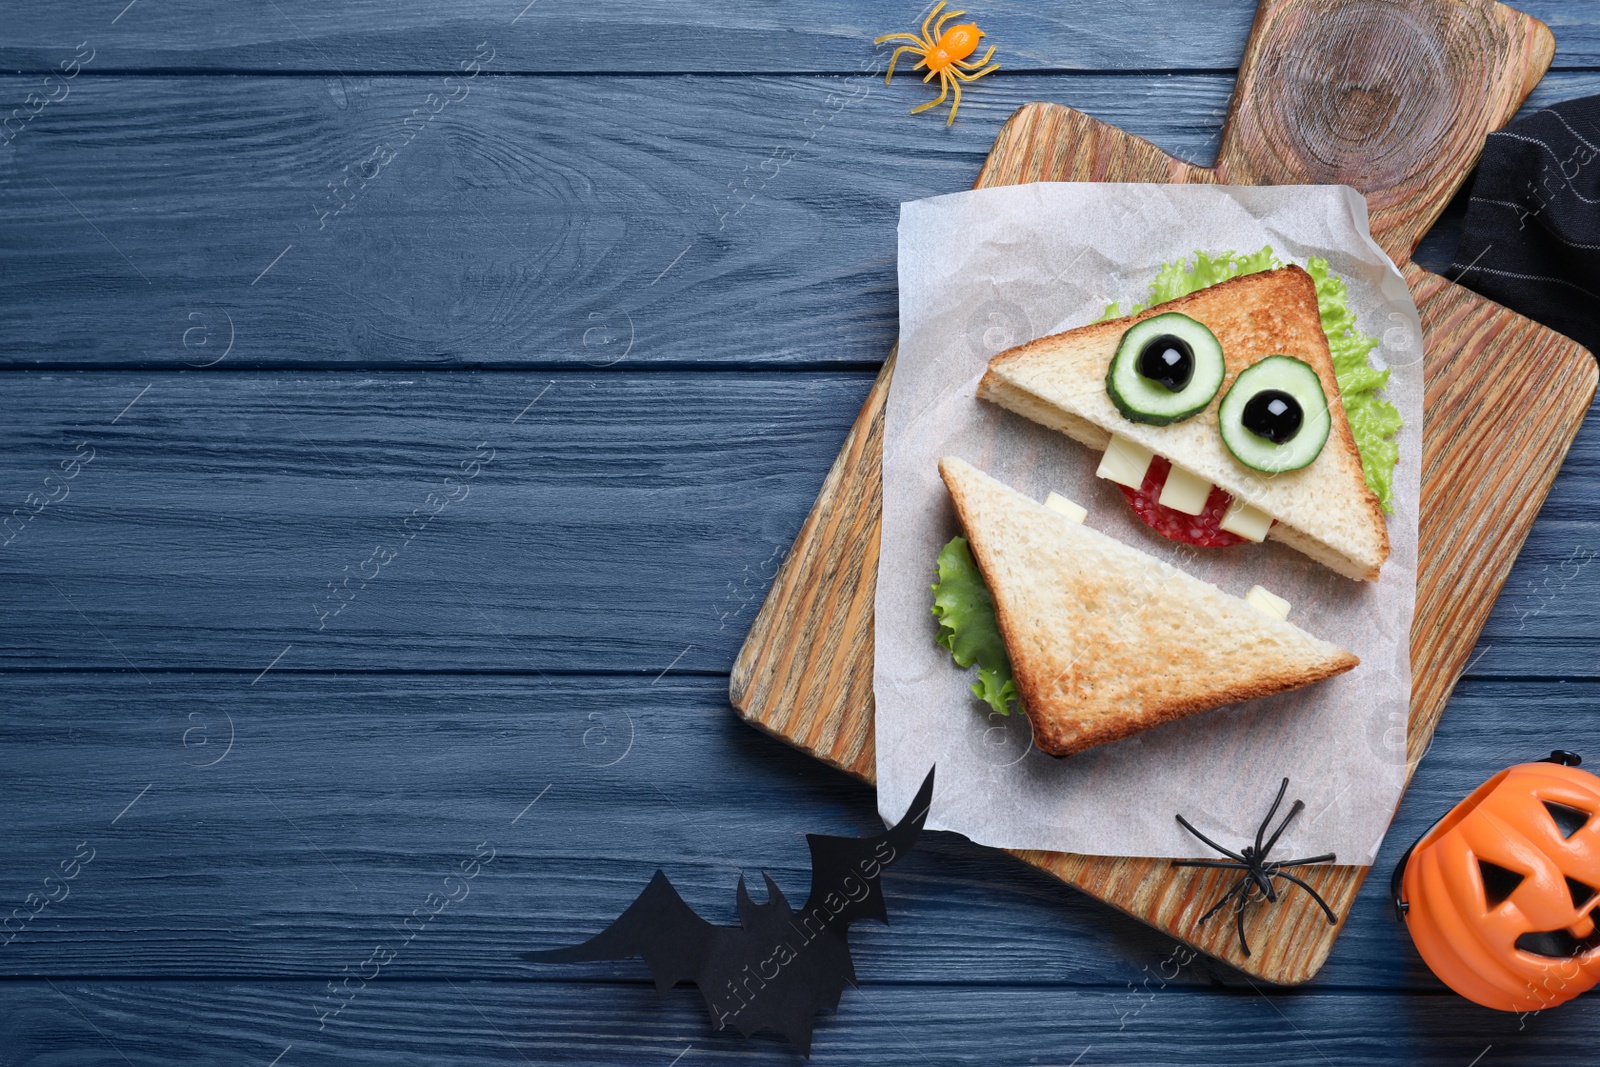 Photo of Cute monster sandwich served on blue wooden table, flat lay with space for text. Halloween party food